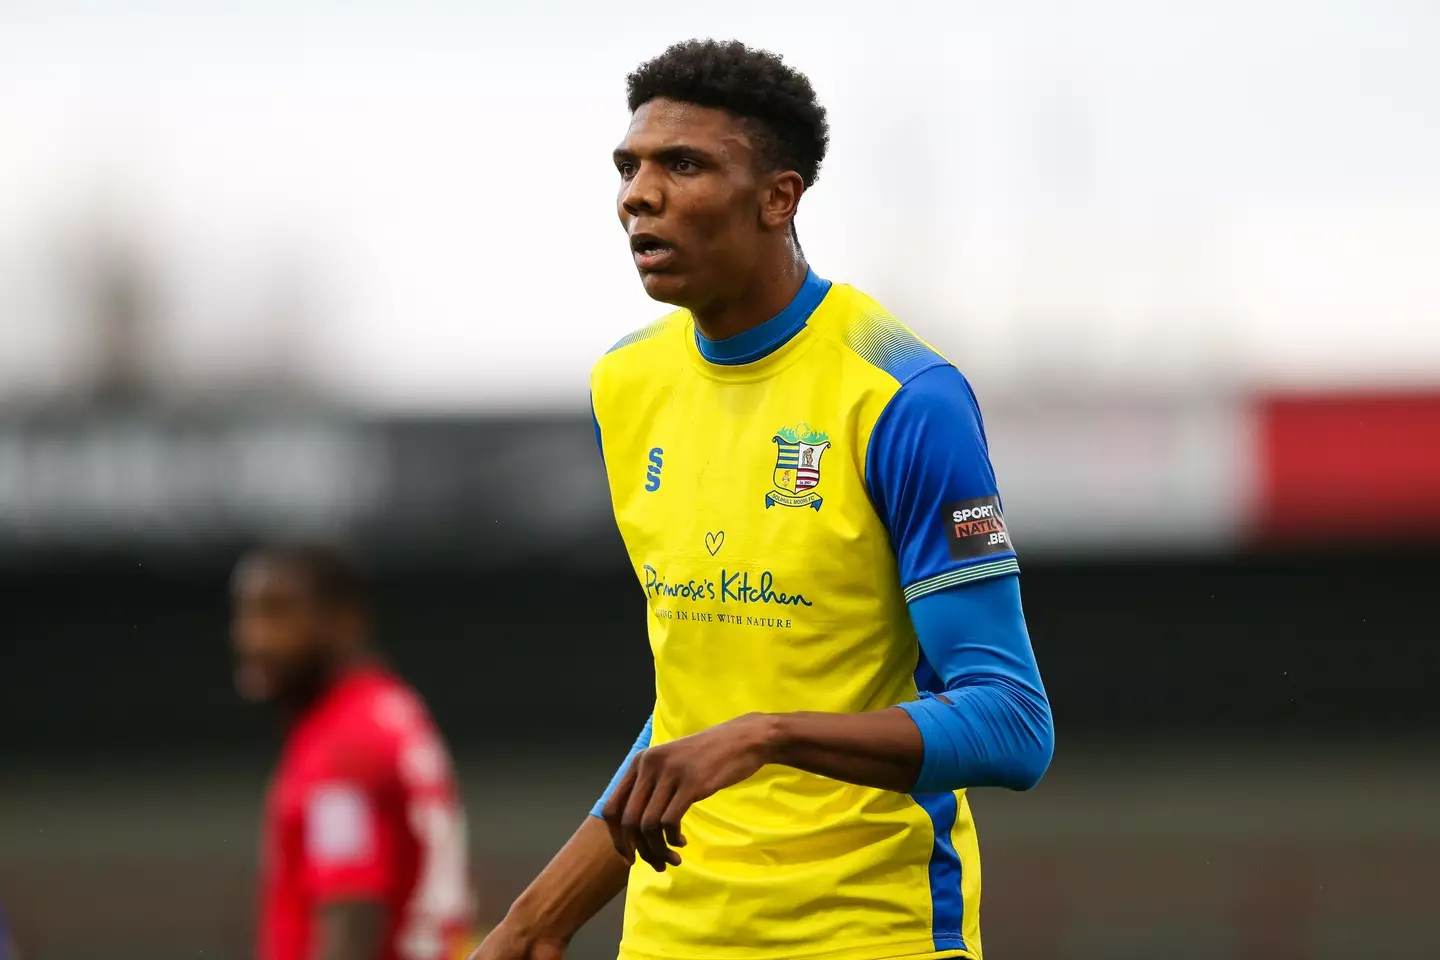 Kyle Hudlin in action for Solihull Moors. Image: PA